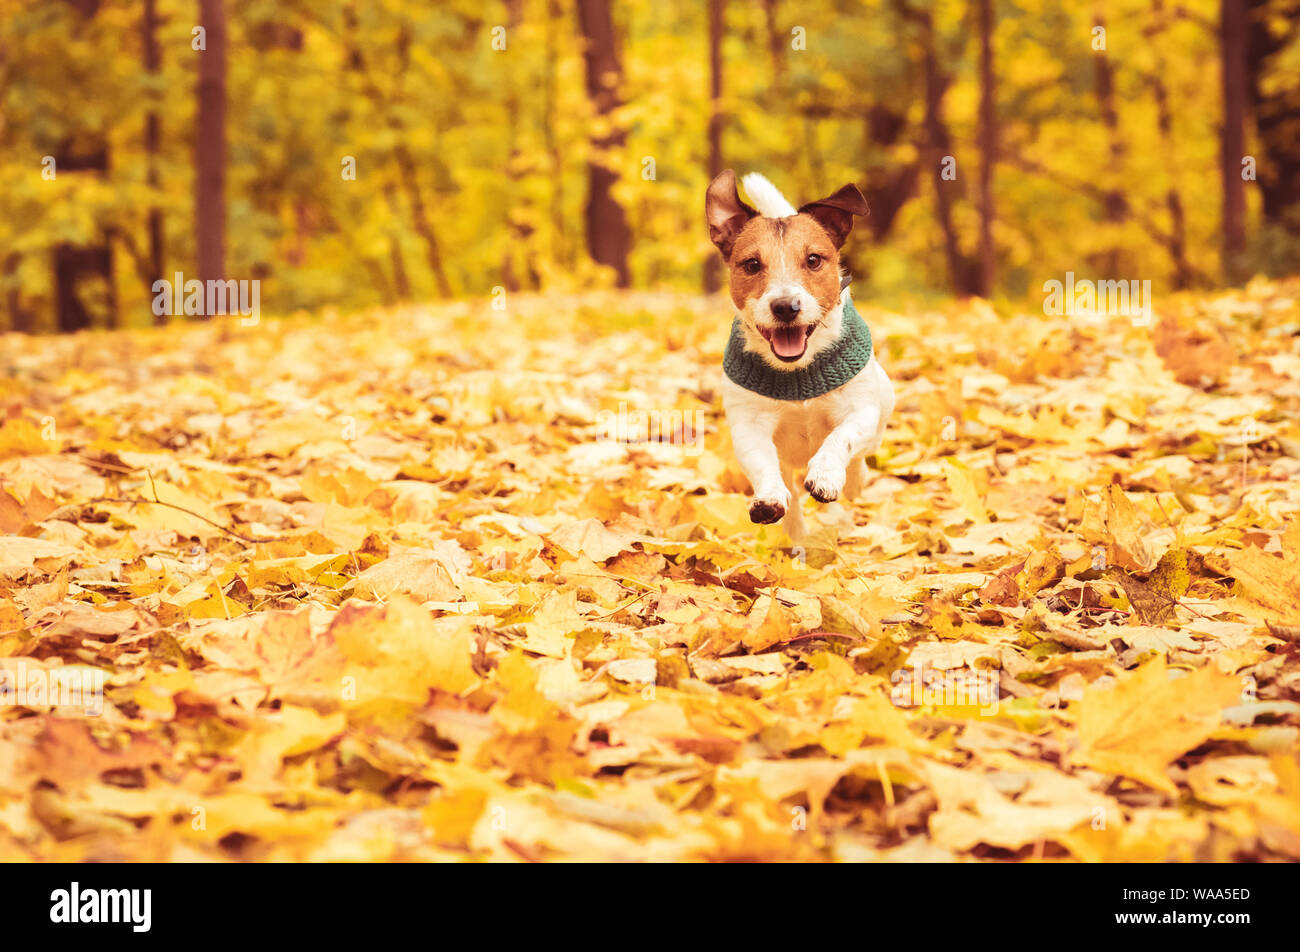 Playful dog running and romping at lawn covered with colorful fallen autumn leaves Stock Photo